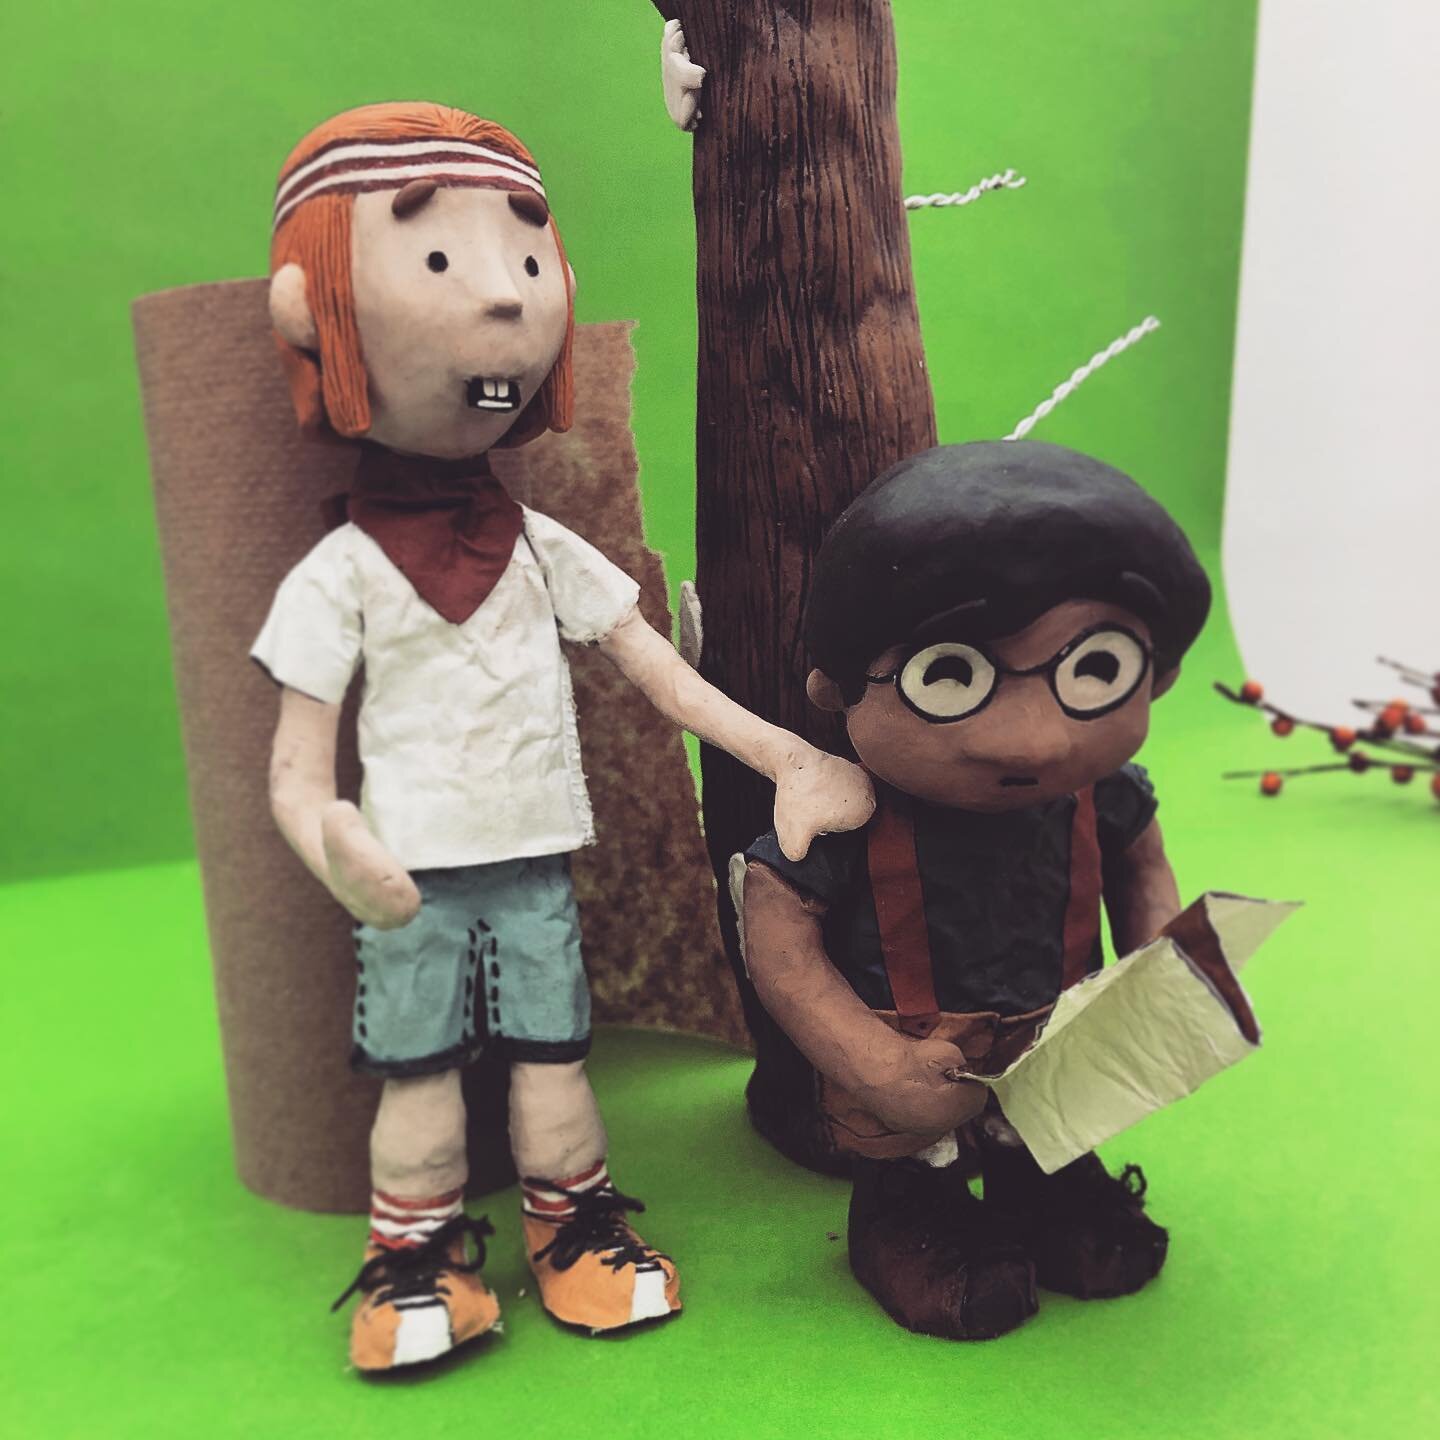 One of the many forms of stop motion animation our team is skilled at is claymation. Here on set, our animators work with these hand-made clay characters, moving them ever so slowly through their sets.
.
.
.
#stopmotion #animation #vizdev #vizdevart 